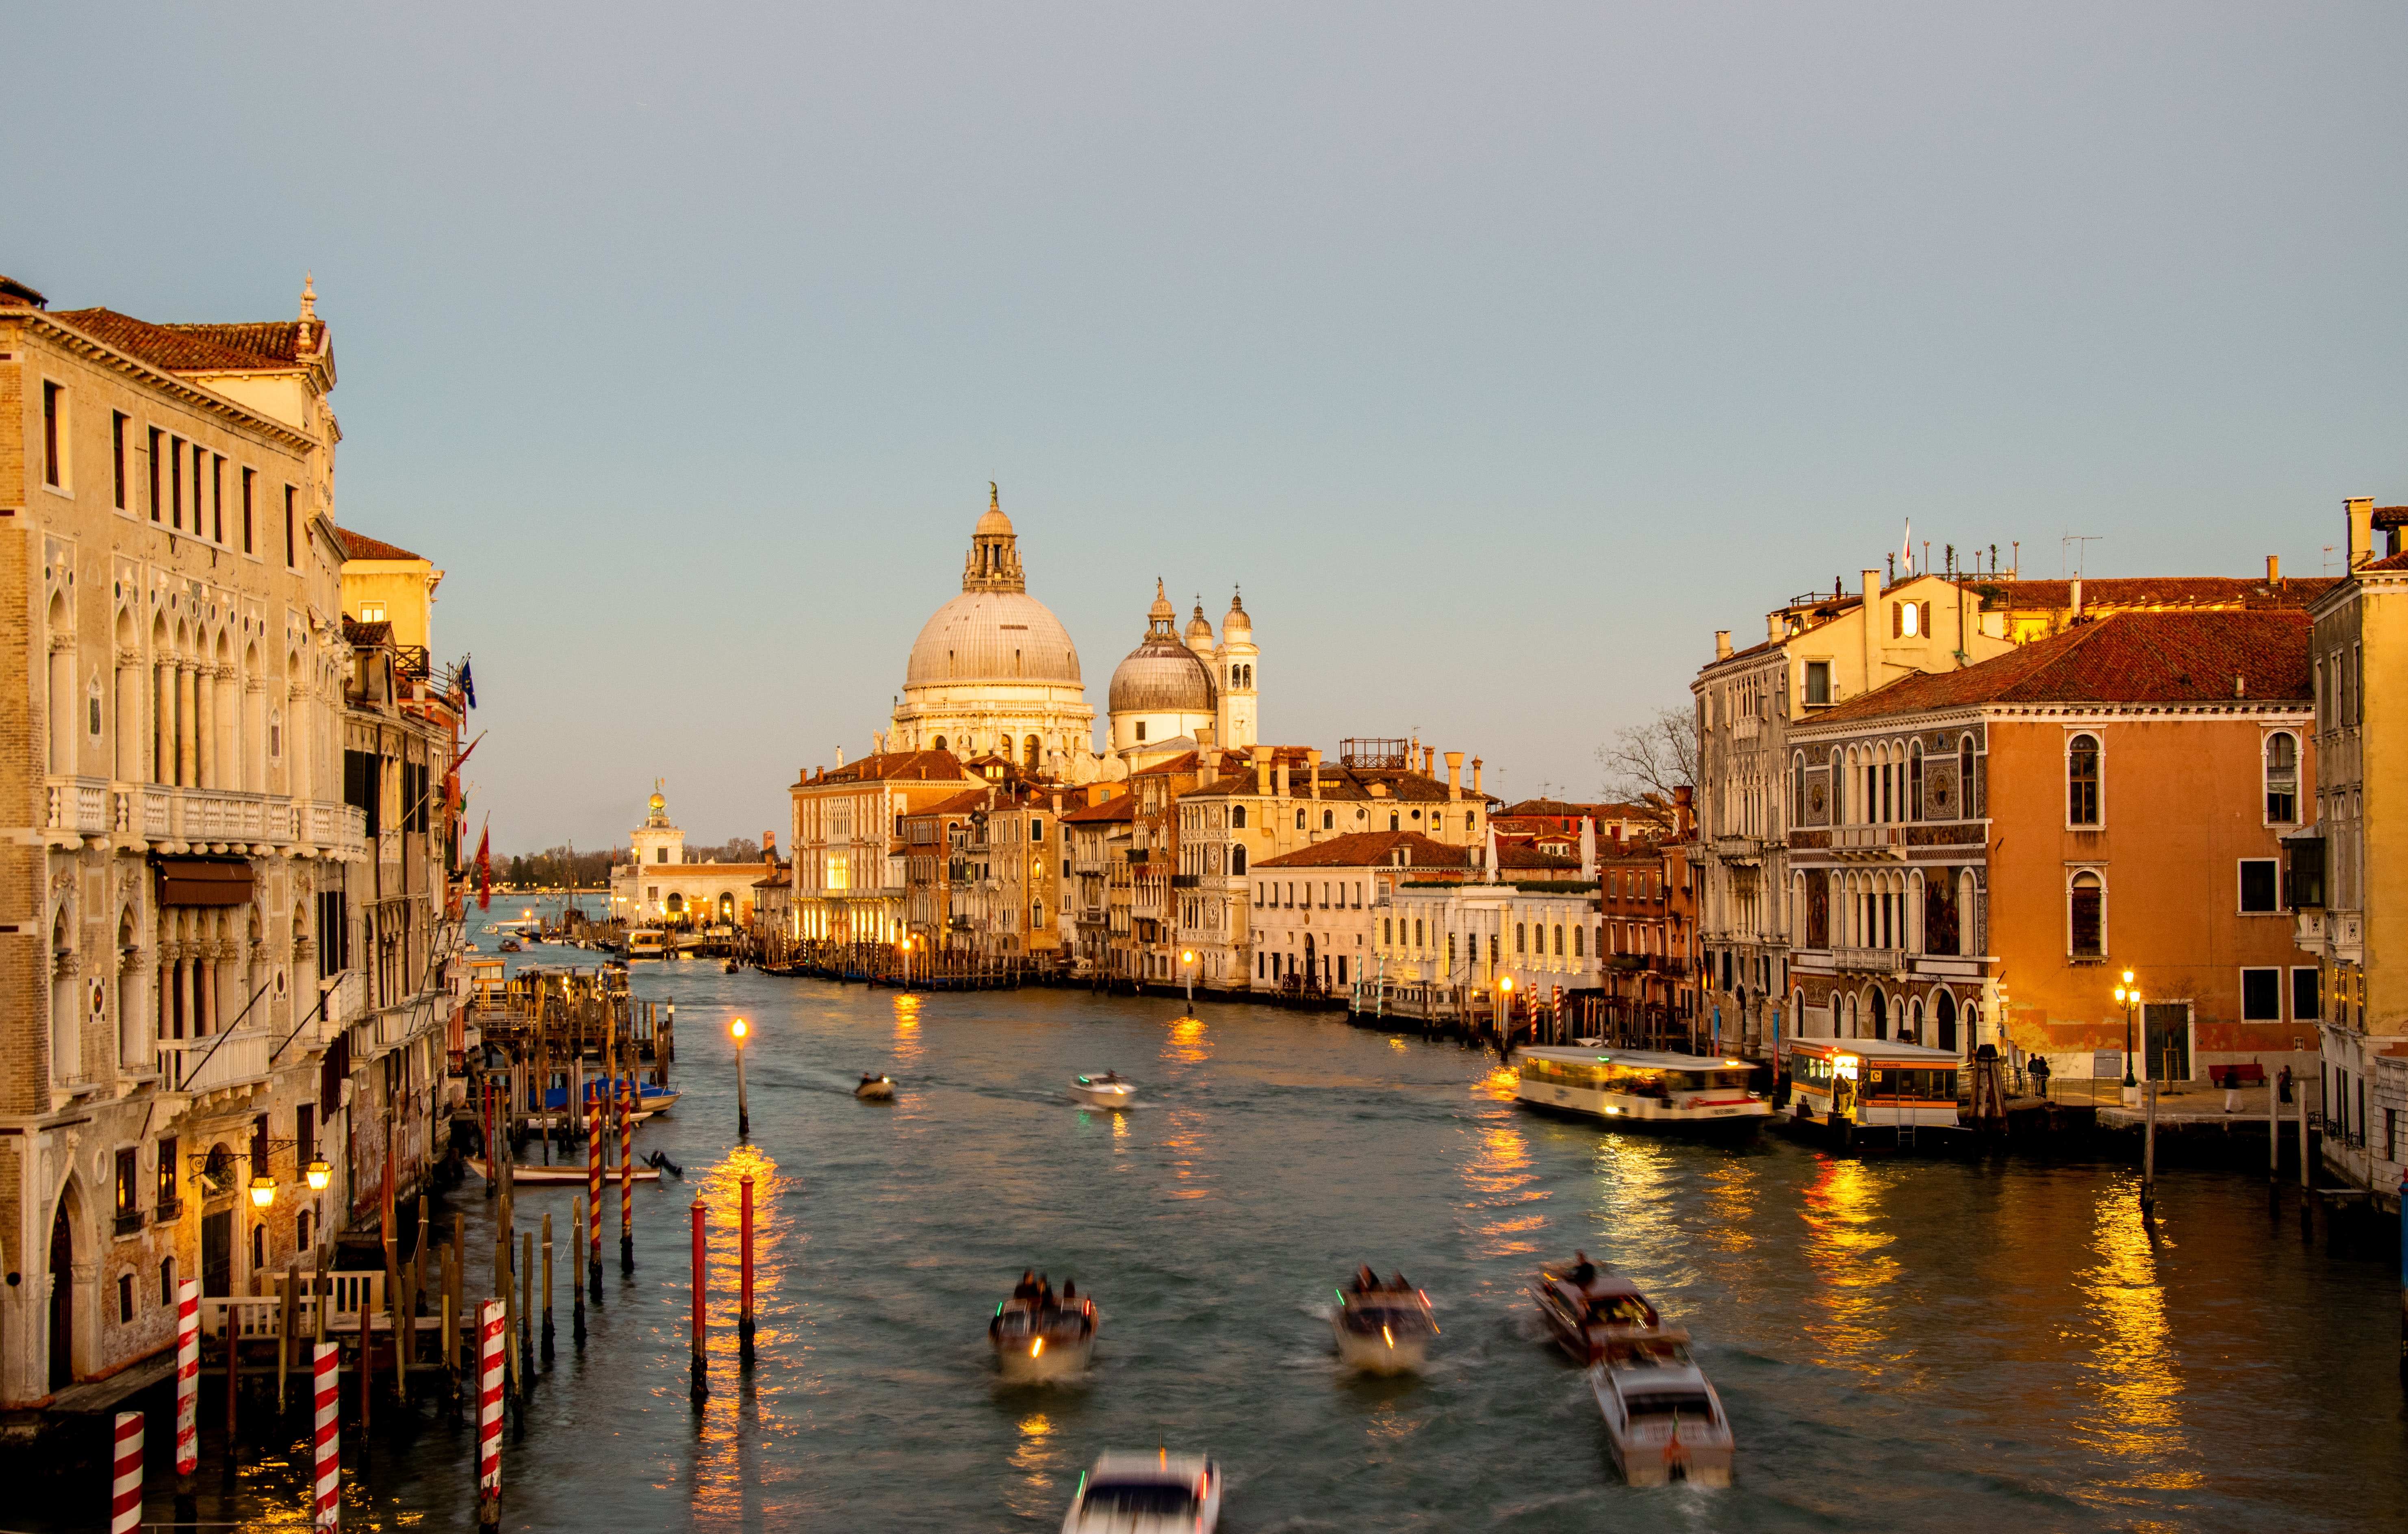 Cover Image for Experience the Magic of Venice: Top 14 Things to Do in the City of Canals